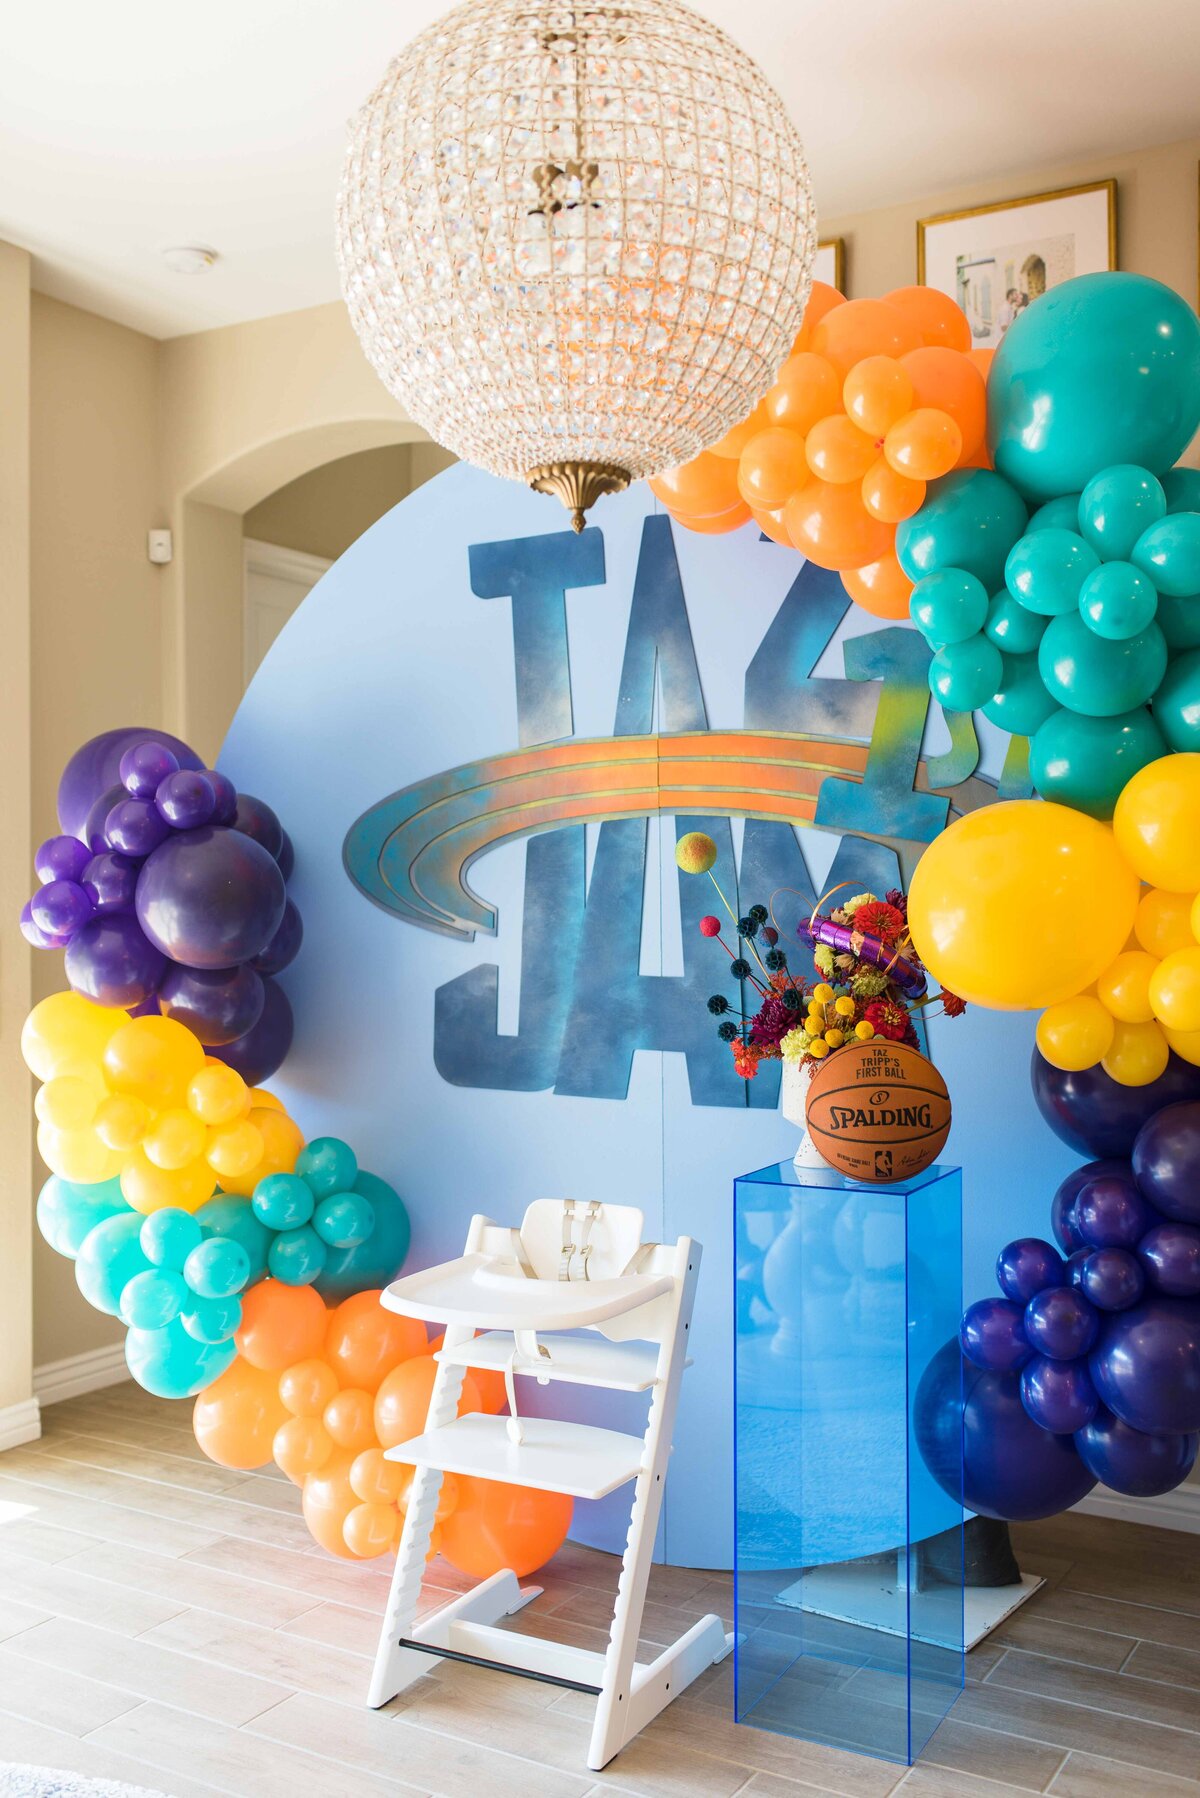 matiana mitchell - first-birthday-party-space-jam-1-4 copy